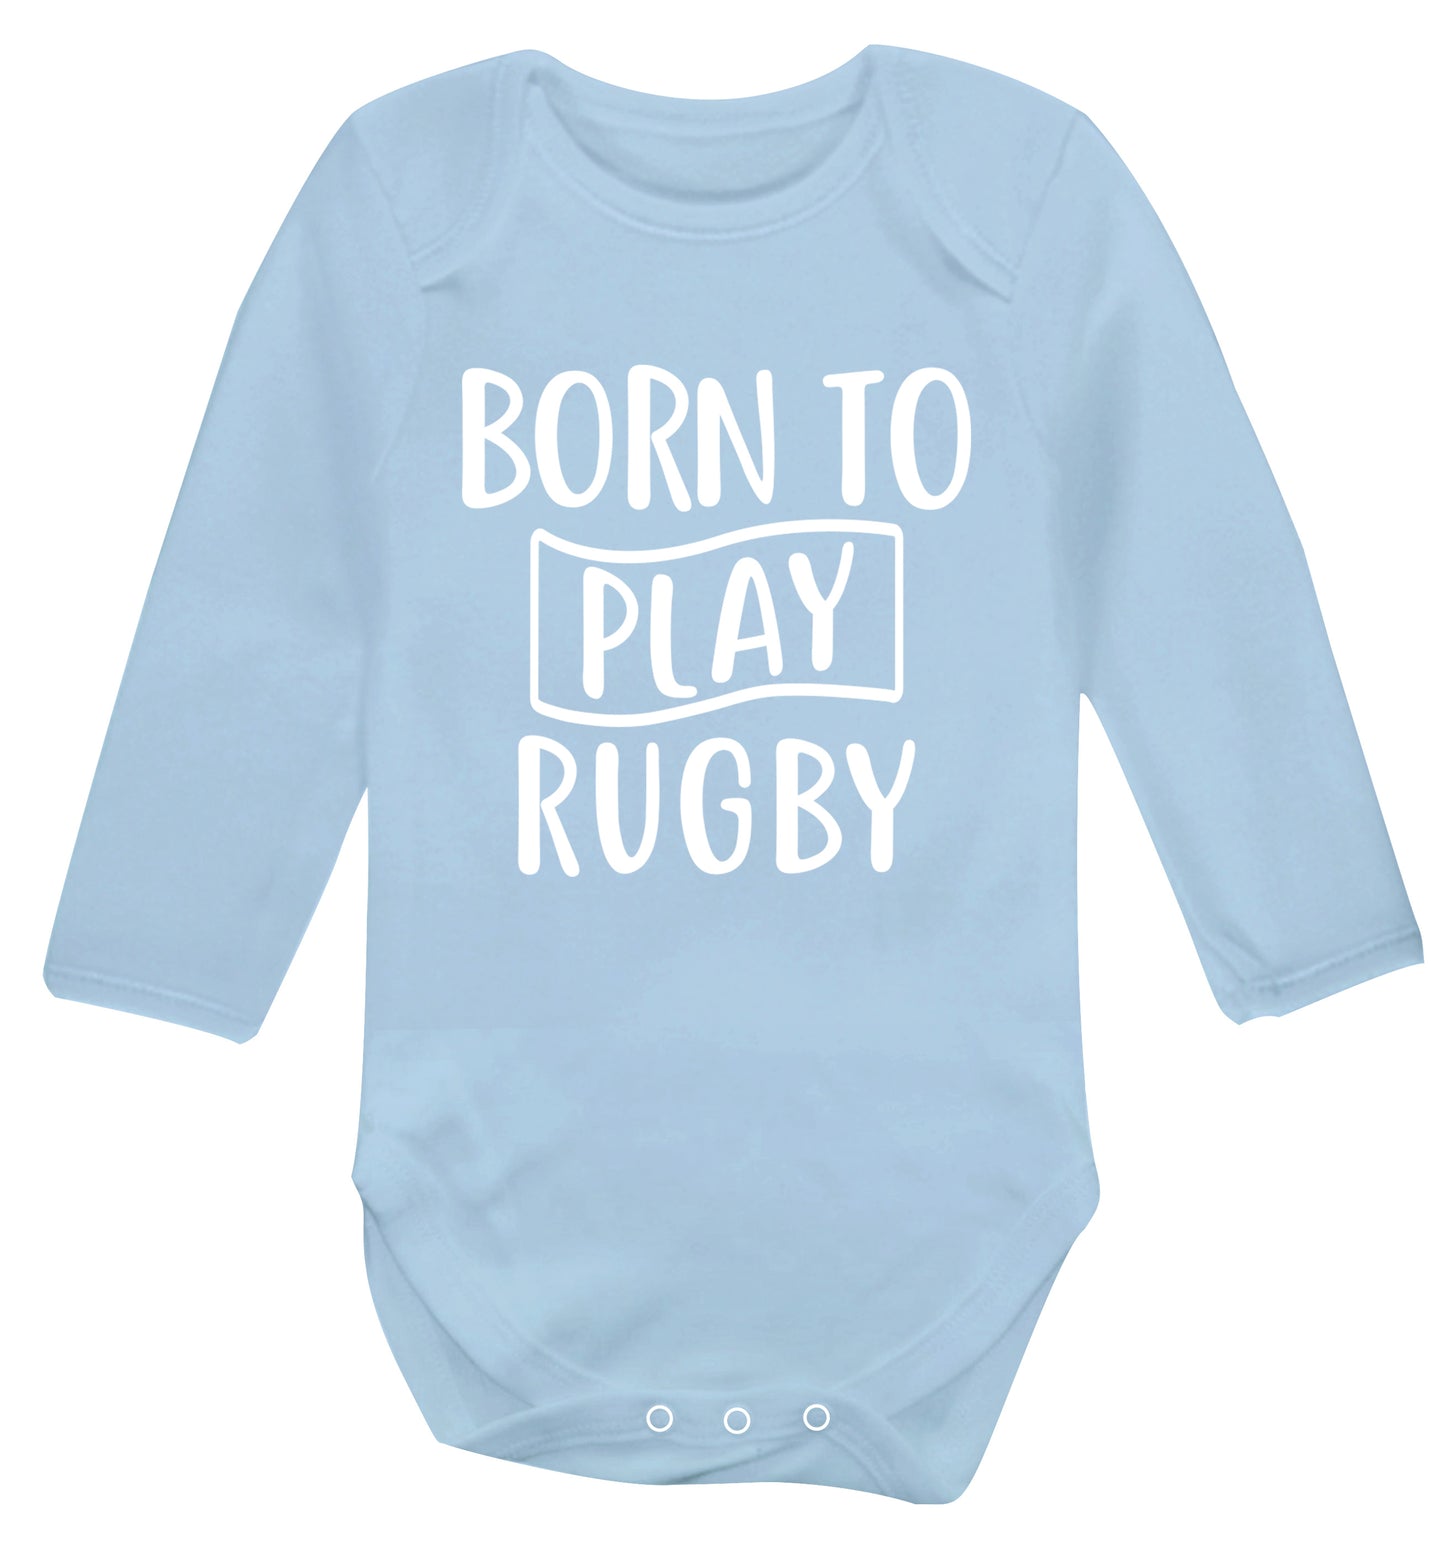 Born to play rugby Baby Vest long sleeved pale blue 6-12 months